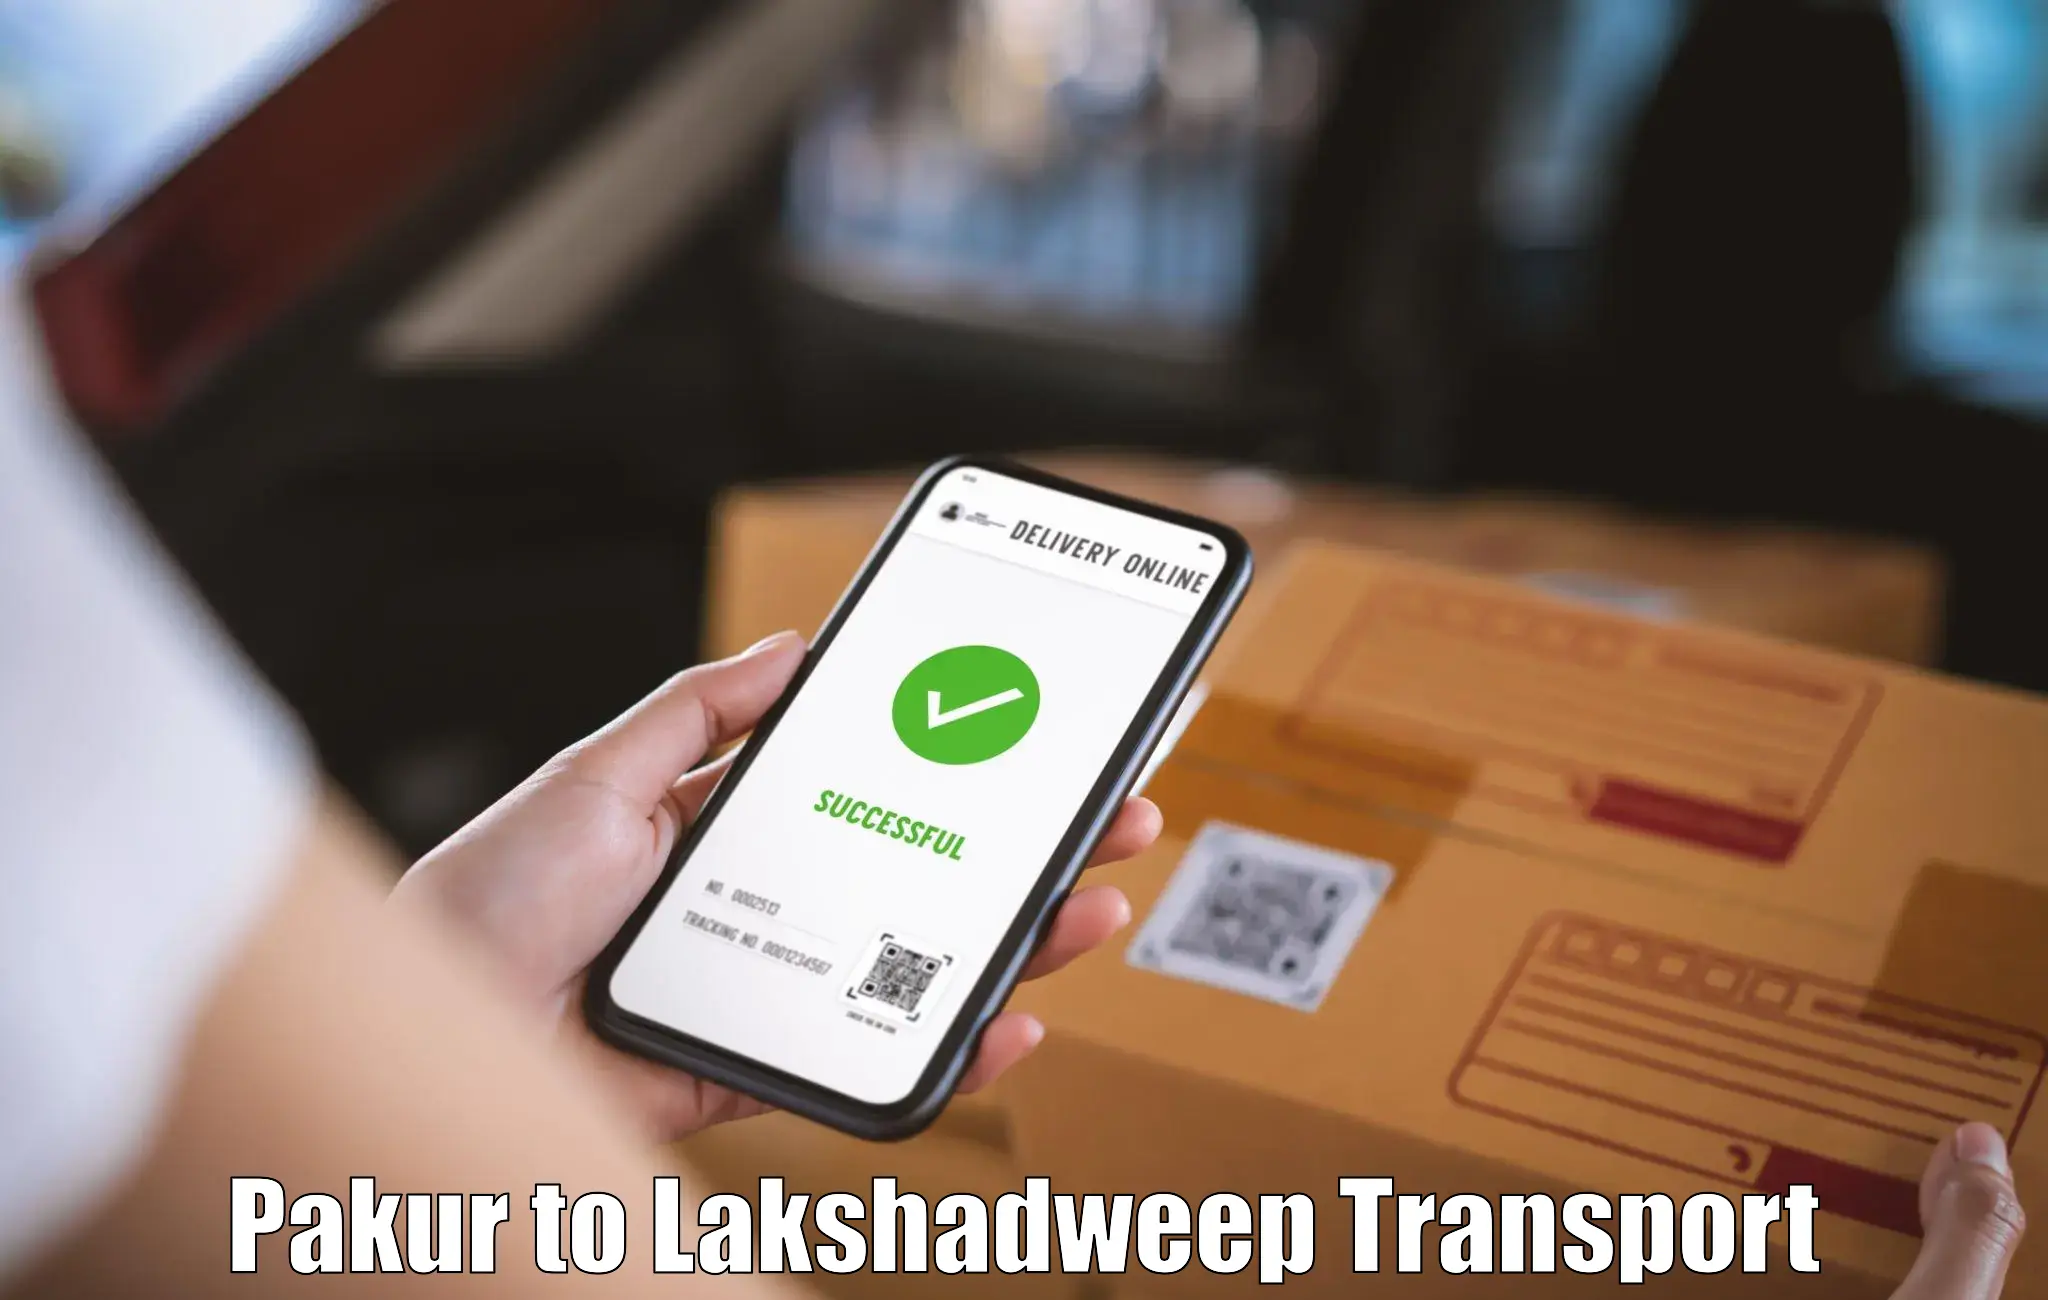 Container transport service Pakur to Lakshadweep